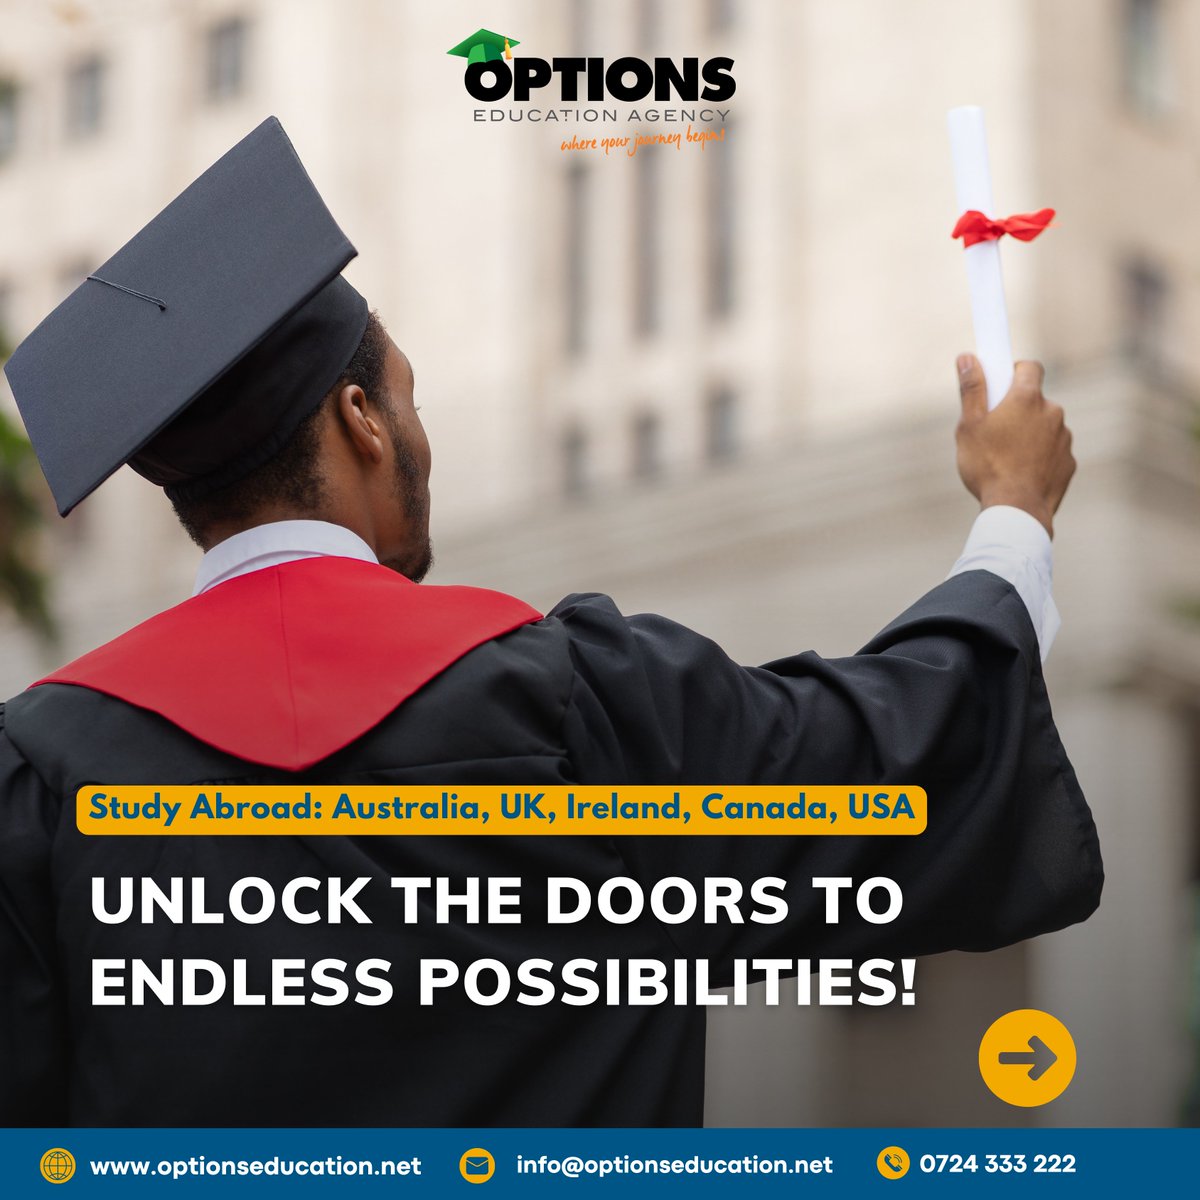 Transform your education experience with Options! Dial 0724 333 222 to learn more and take the first step towards your global future. #studyabroad #studyinaustralia #studyinuk